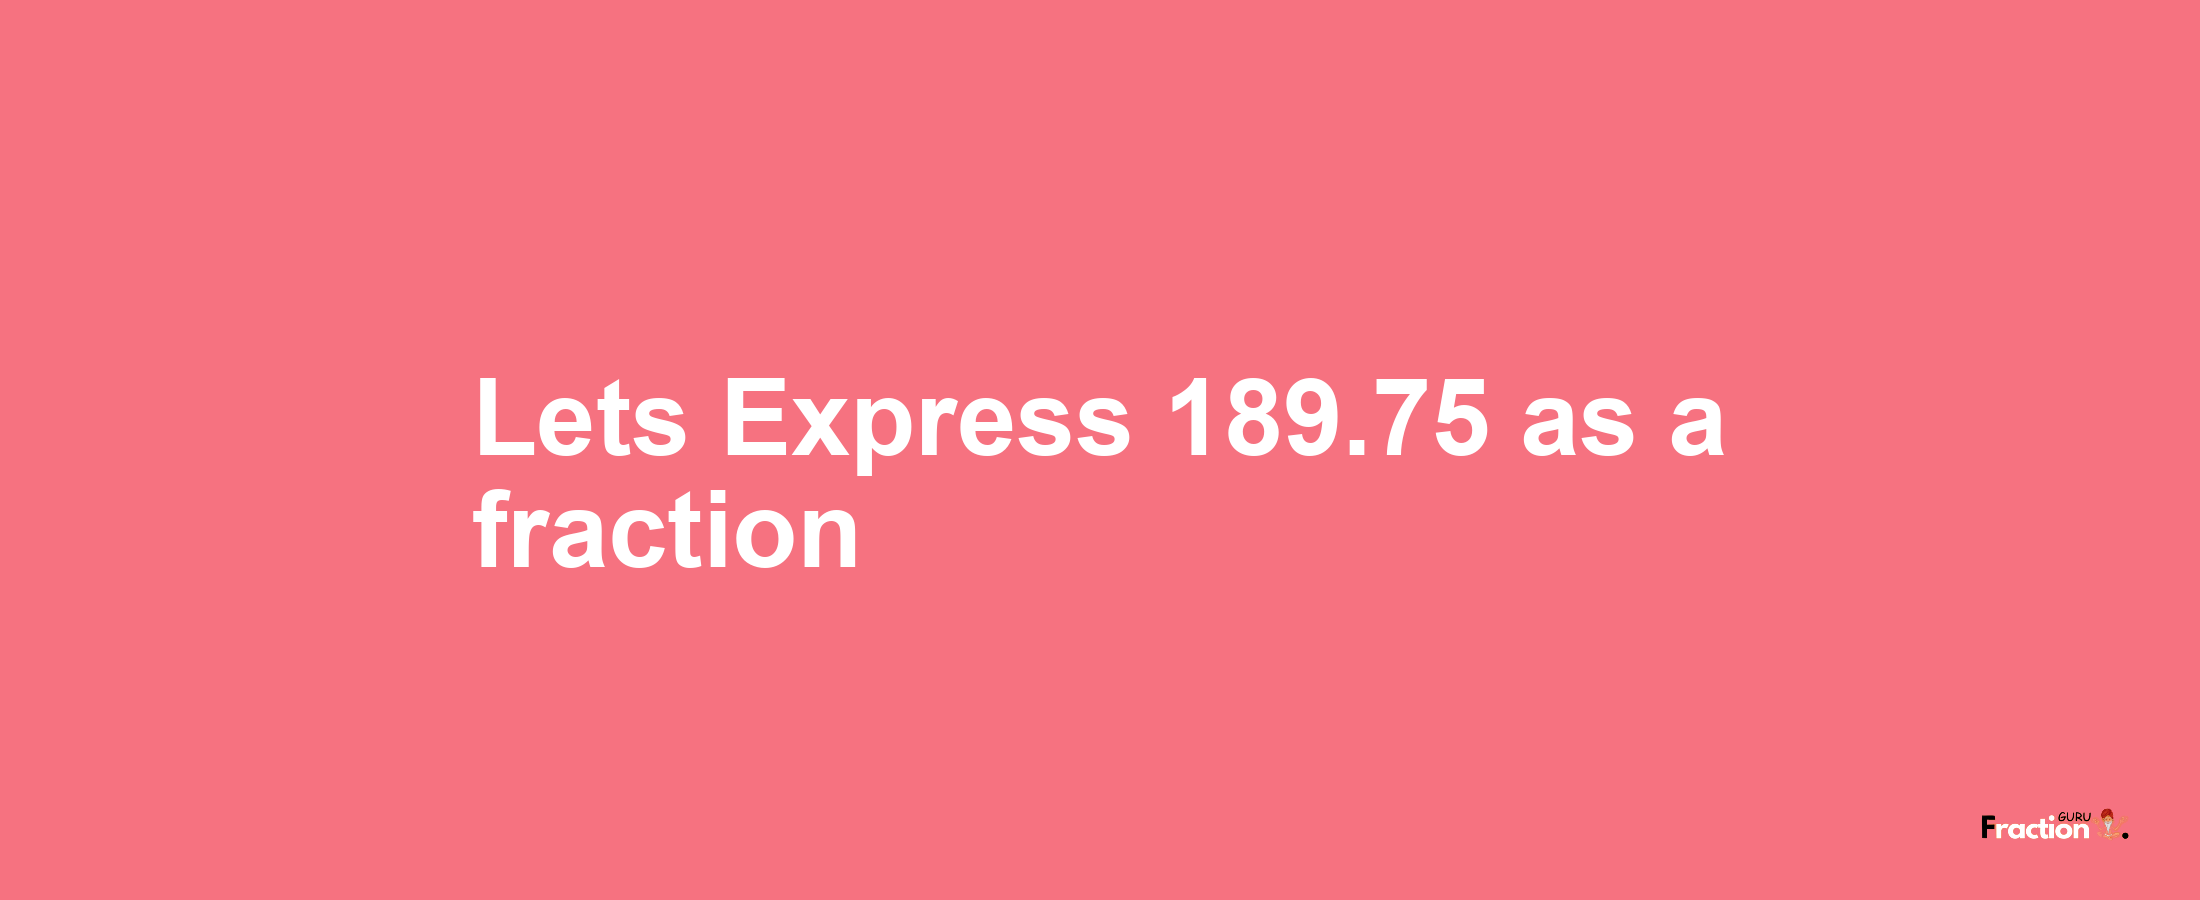 Lets Express 189.75 as afraction